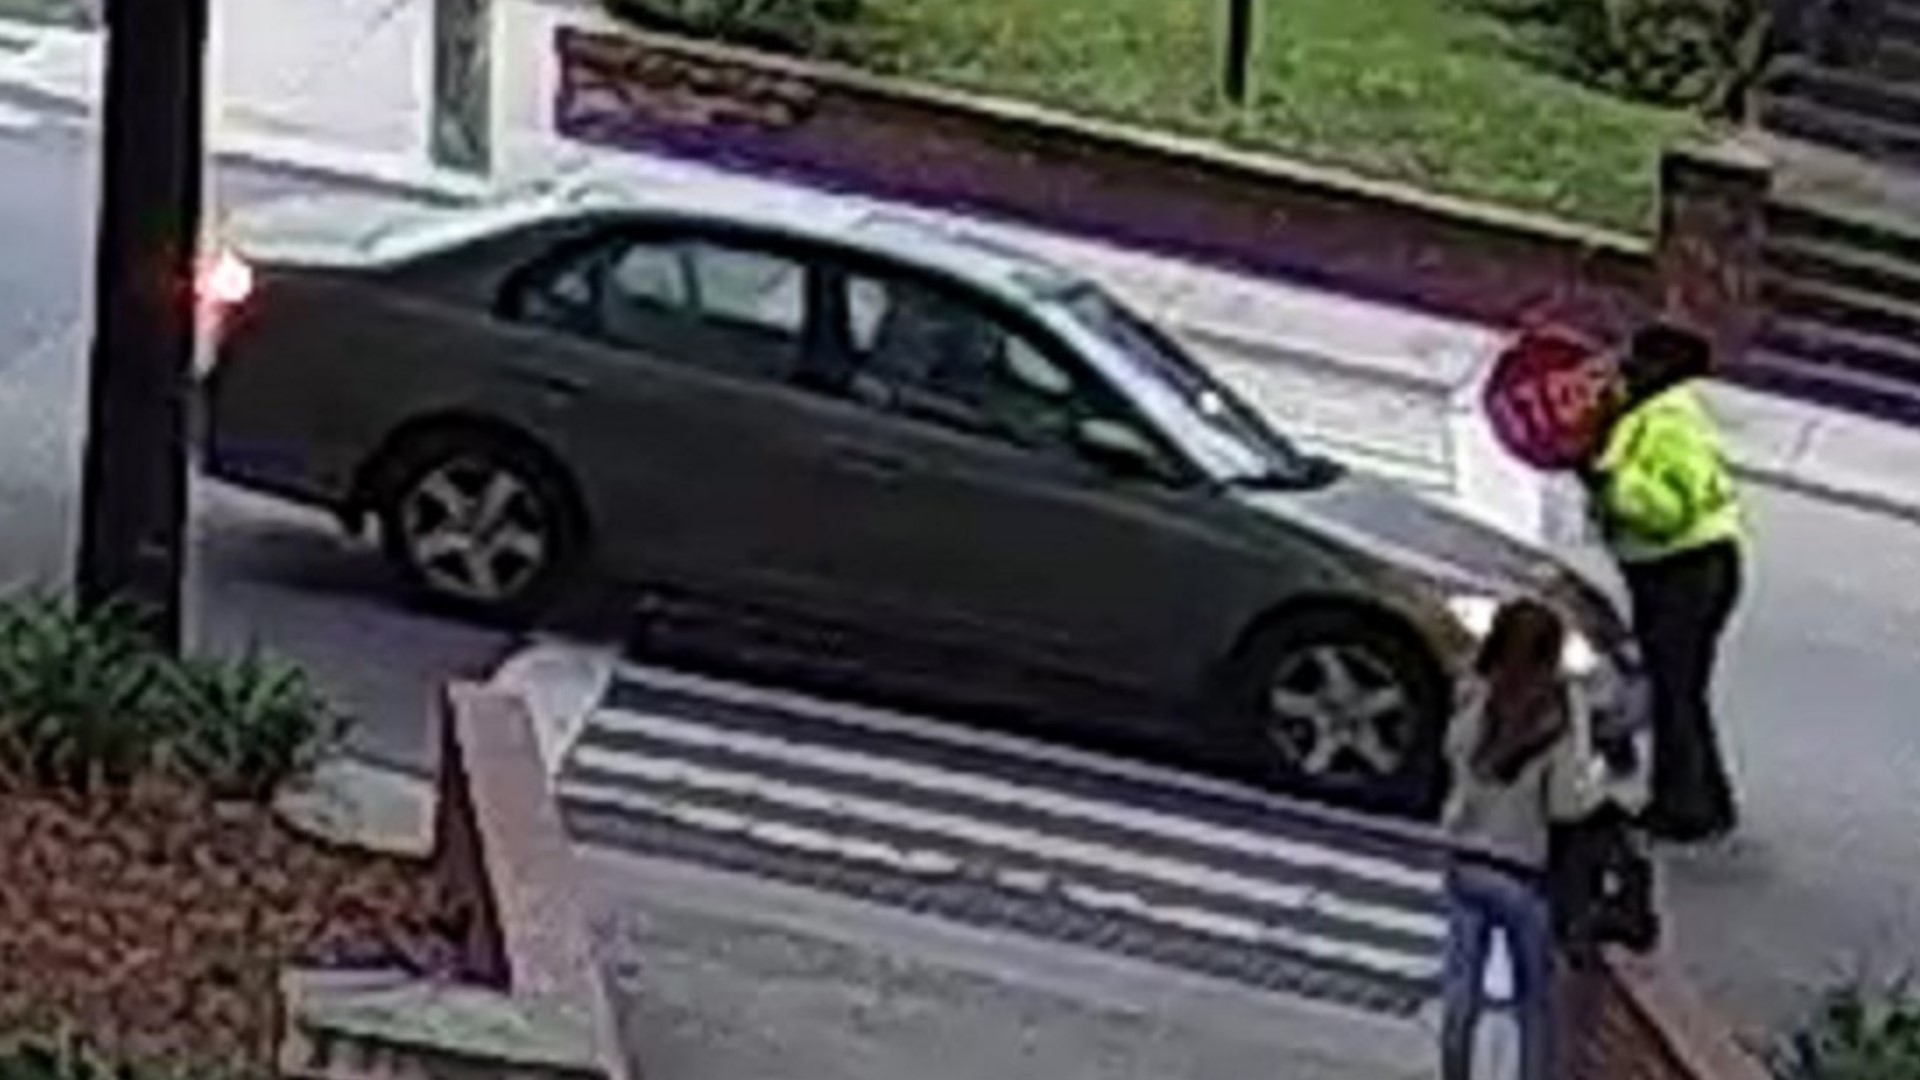 In the video, you can see the Charleston crossing guard trying to stop the car. The car keeps pushing against the guard until it finally pushes her out of the way.